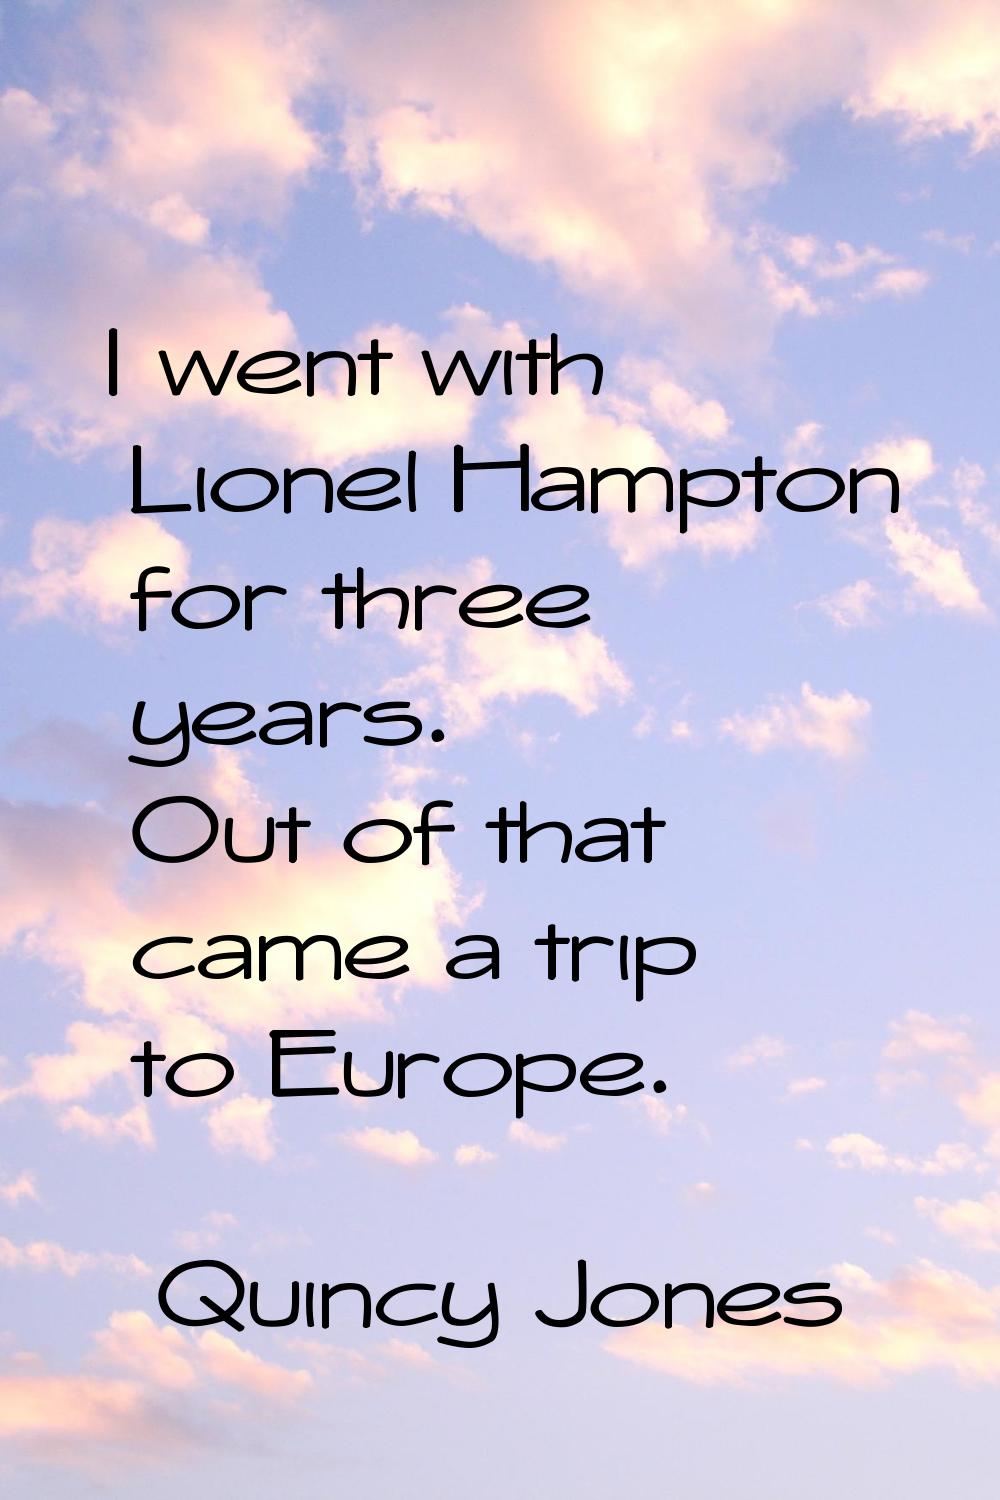 I went with Lionel Hampton for three years. Out of that came a trip to Europe.